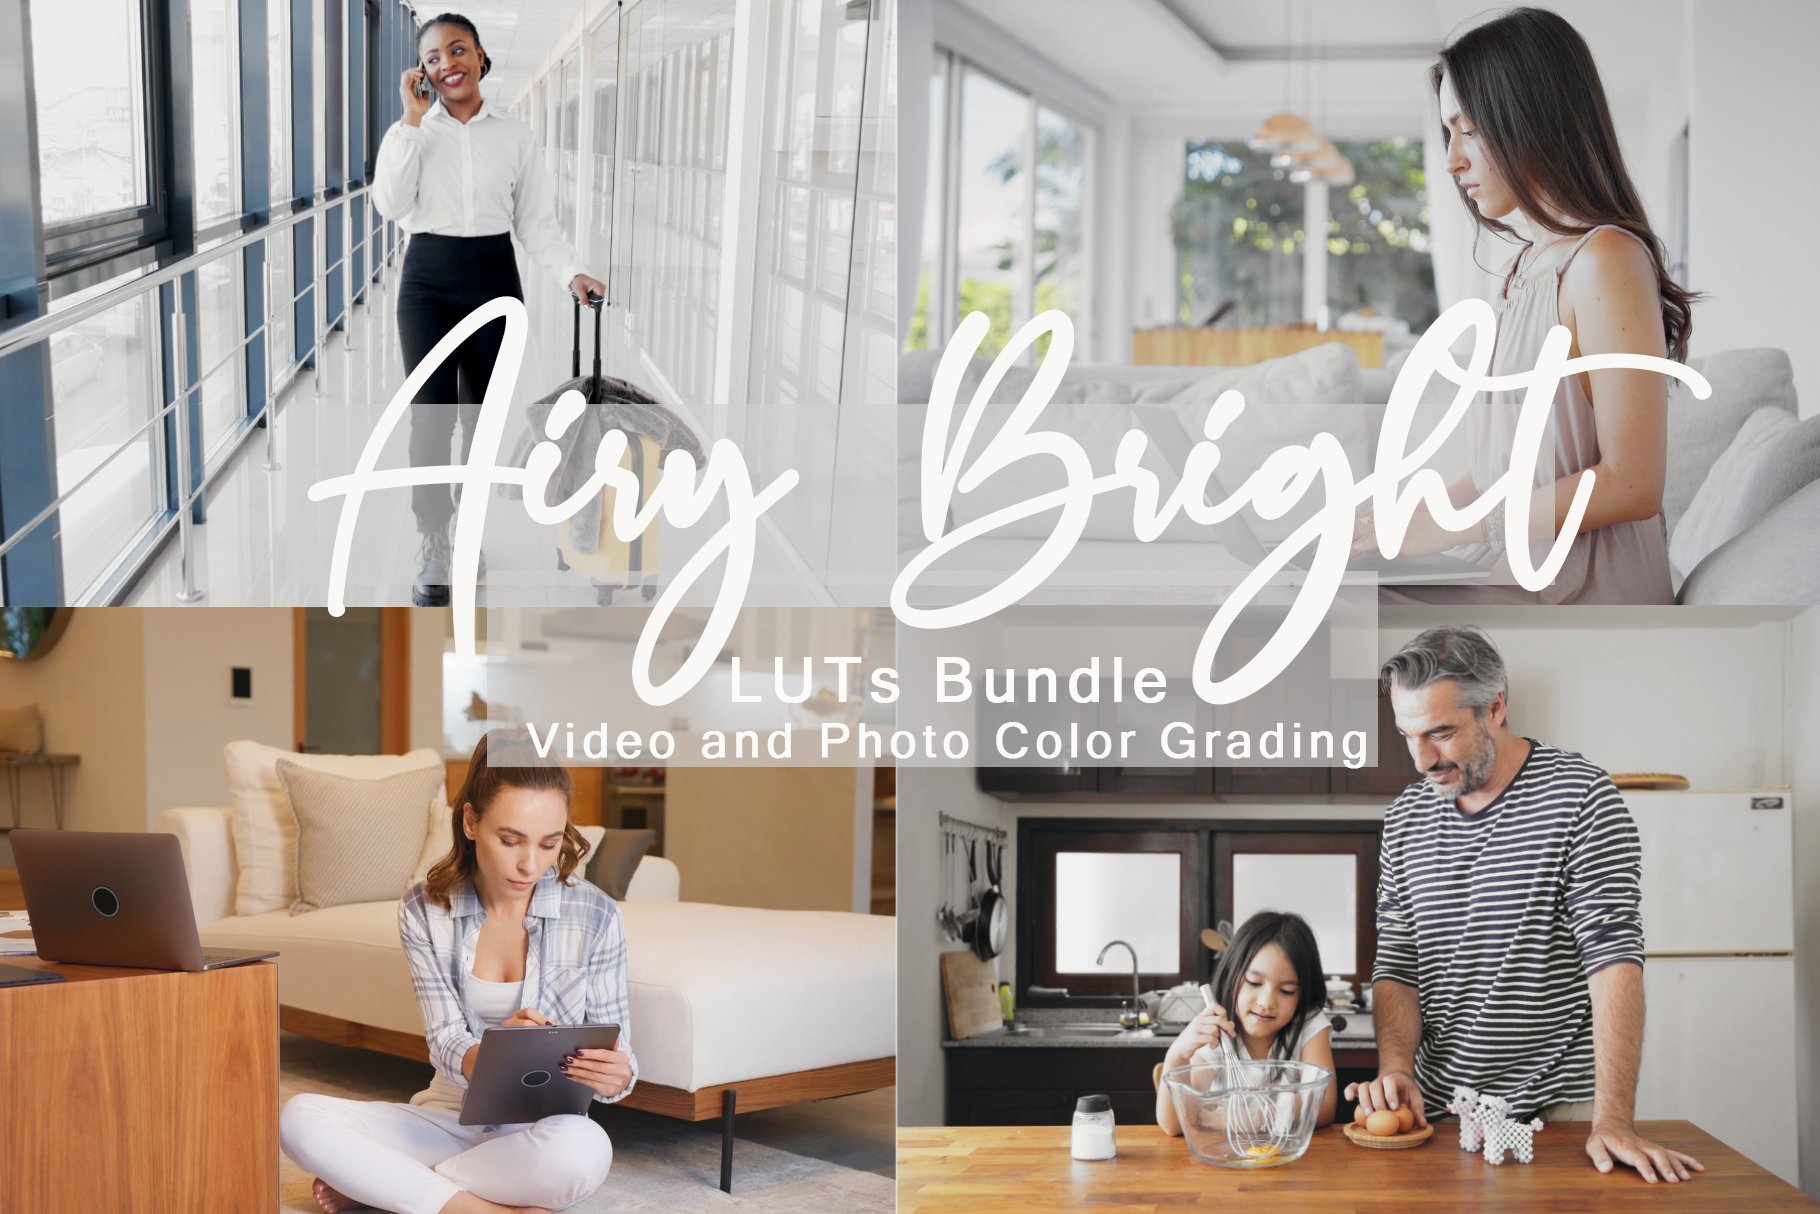 Airy Bright LUTs Bundlecover image.